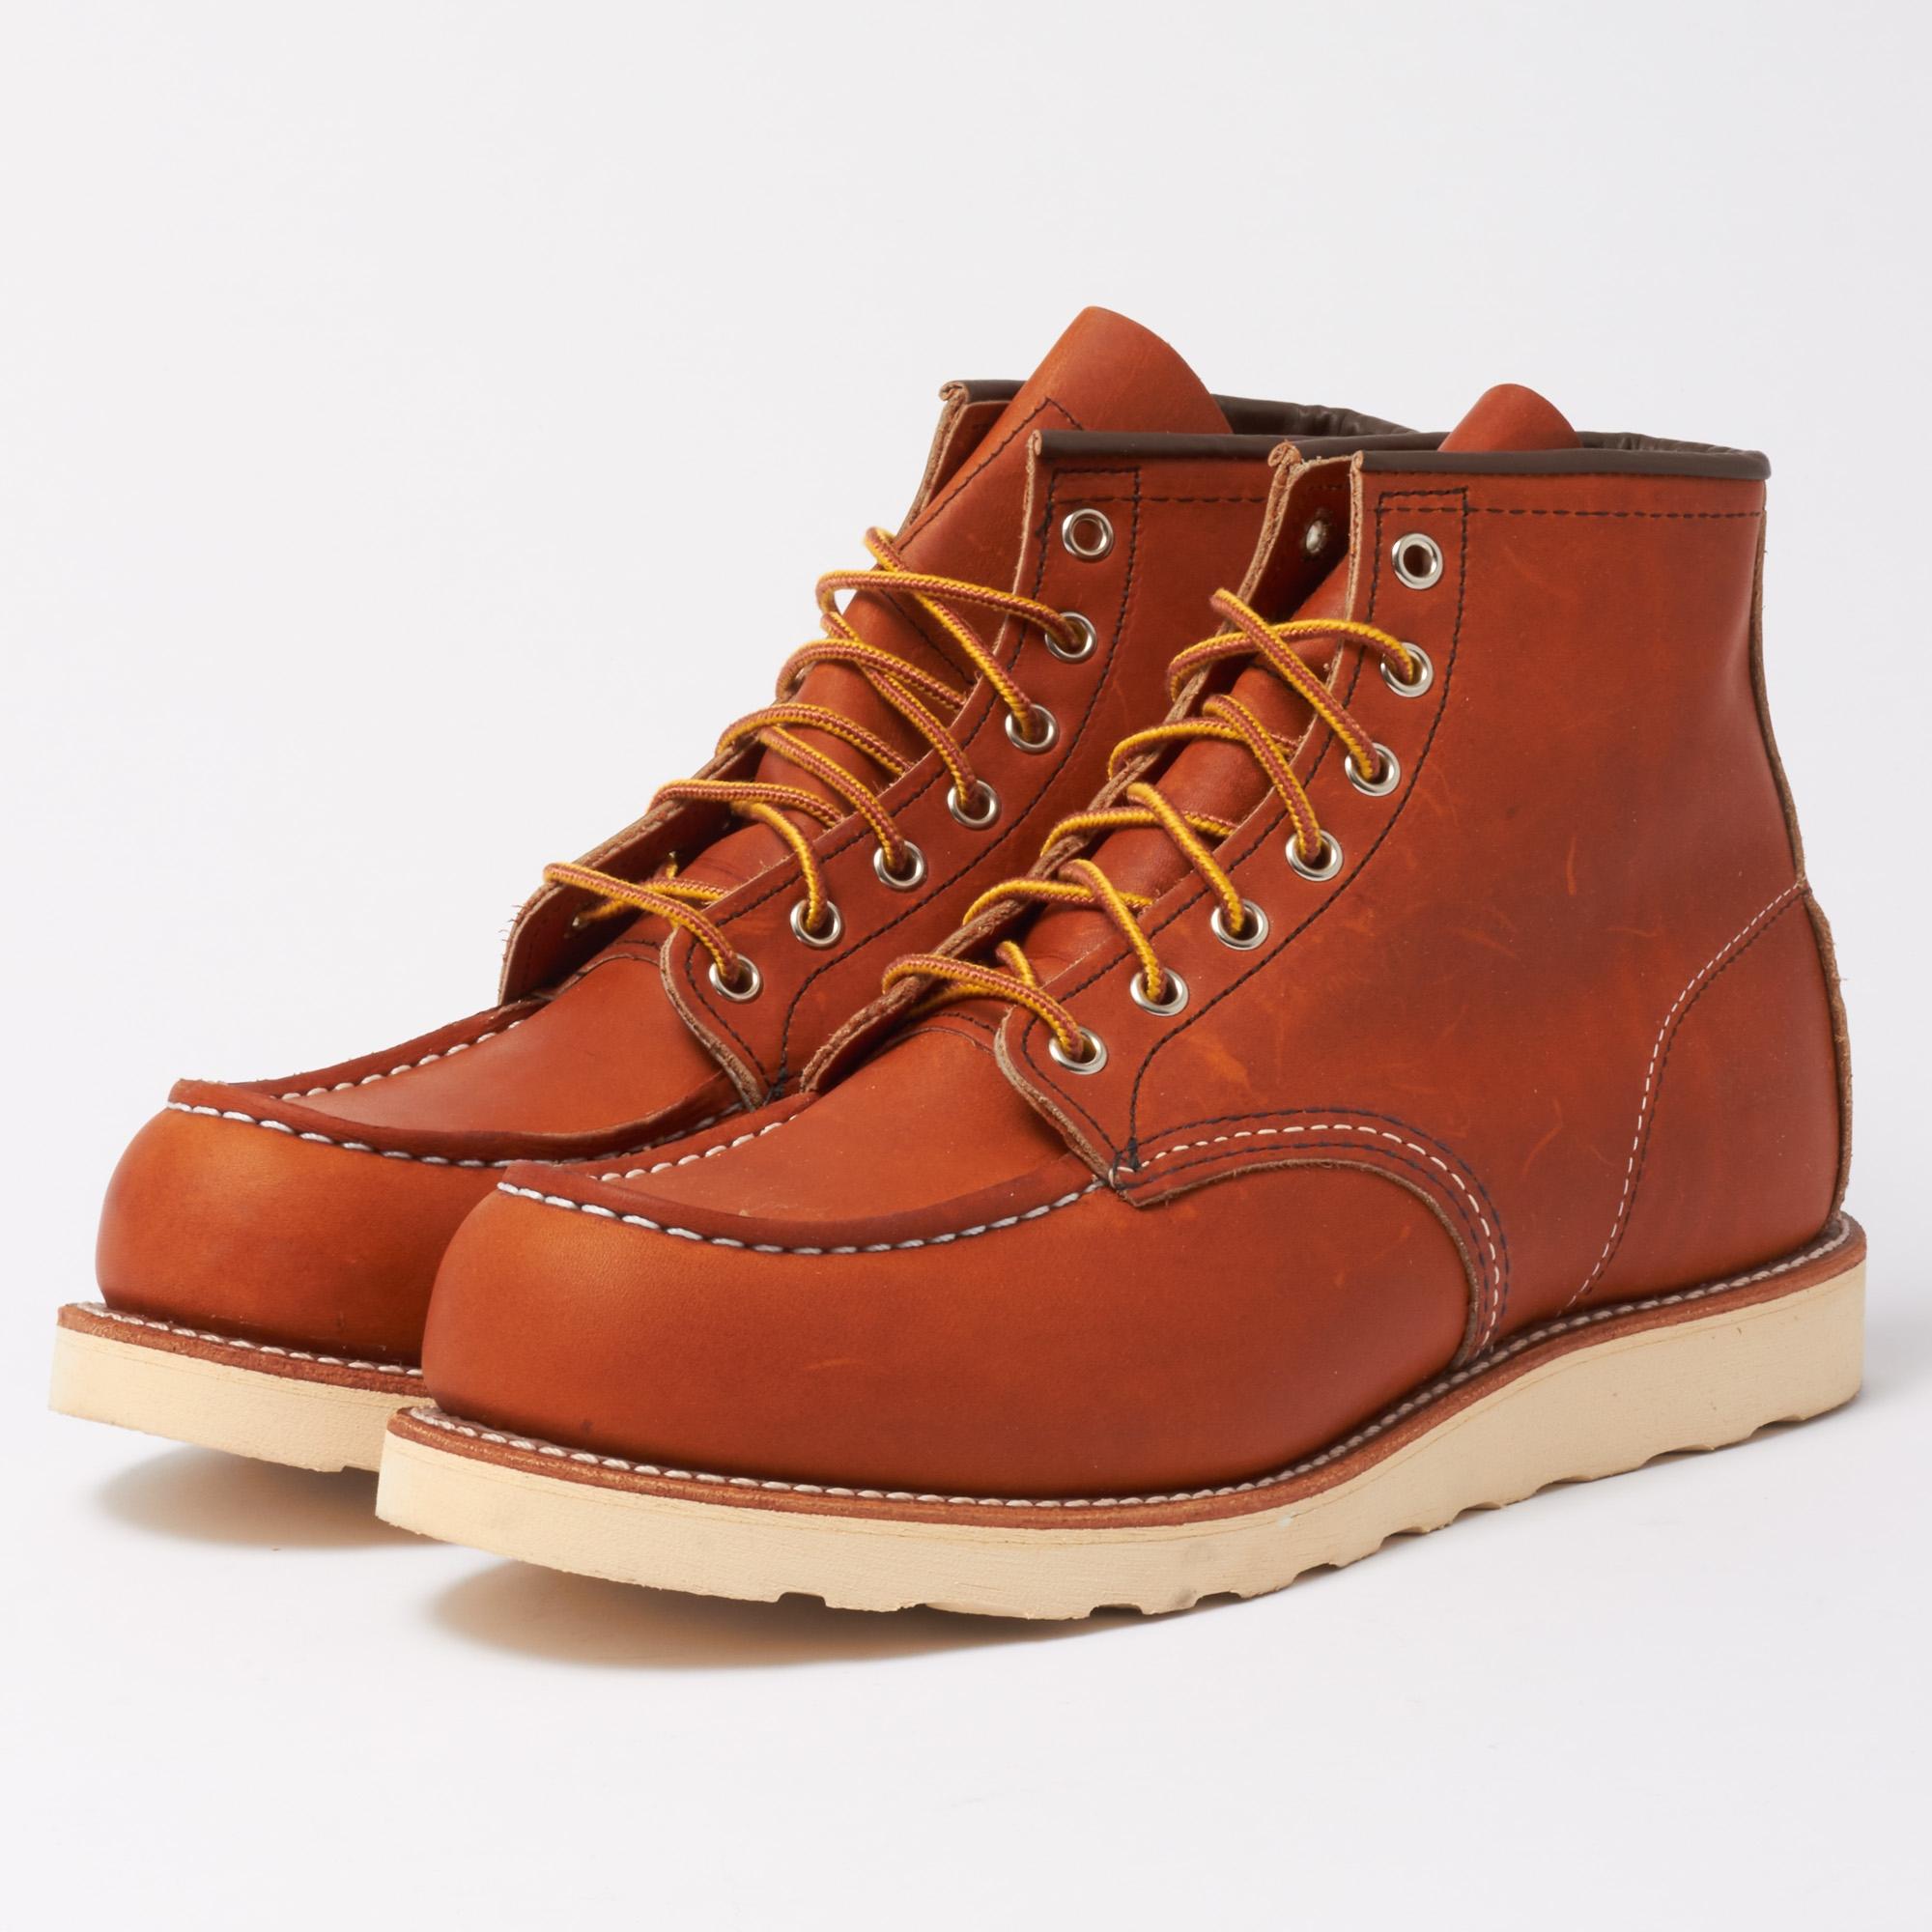 Red Wing Leather Moc Toe Boot in Brown for Men - Save 12% - Lyst